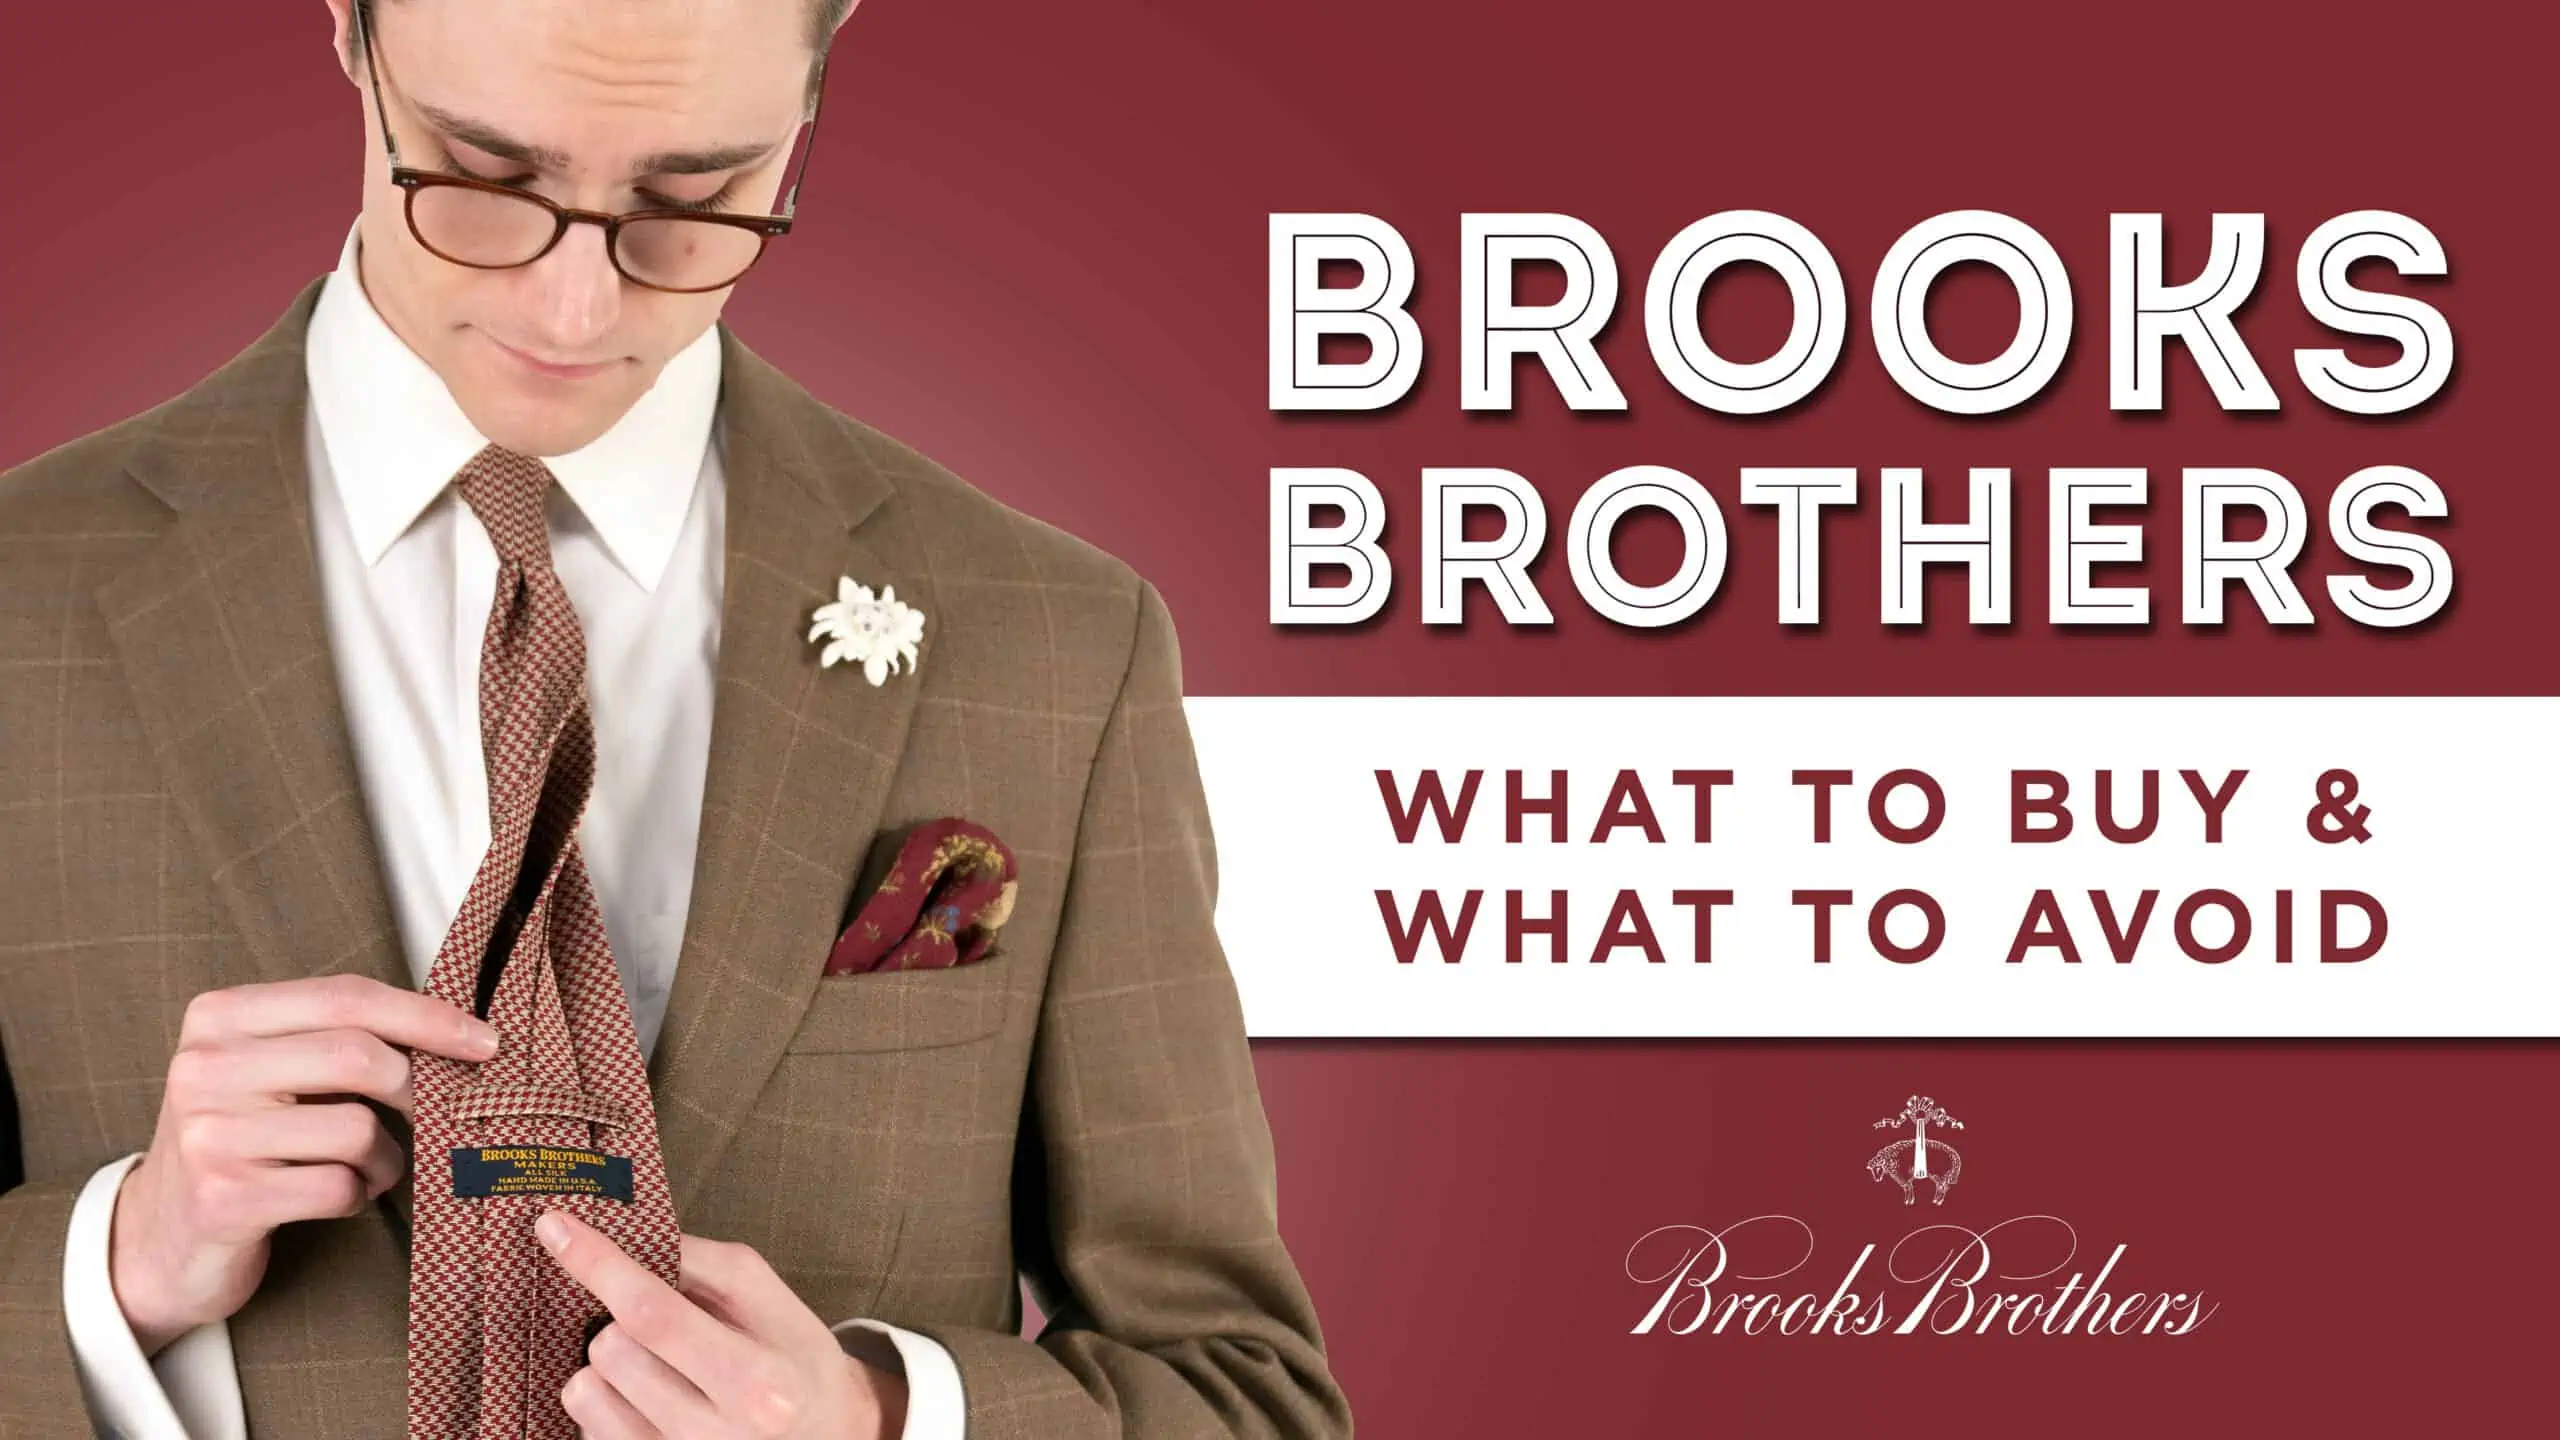 Brooks Brothers: What to Buy & What to Avoid - Brand Value Review